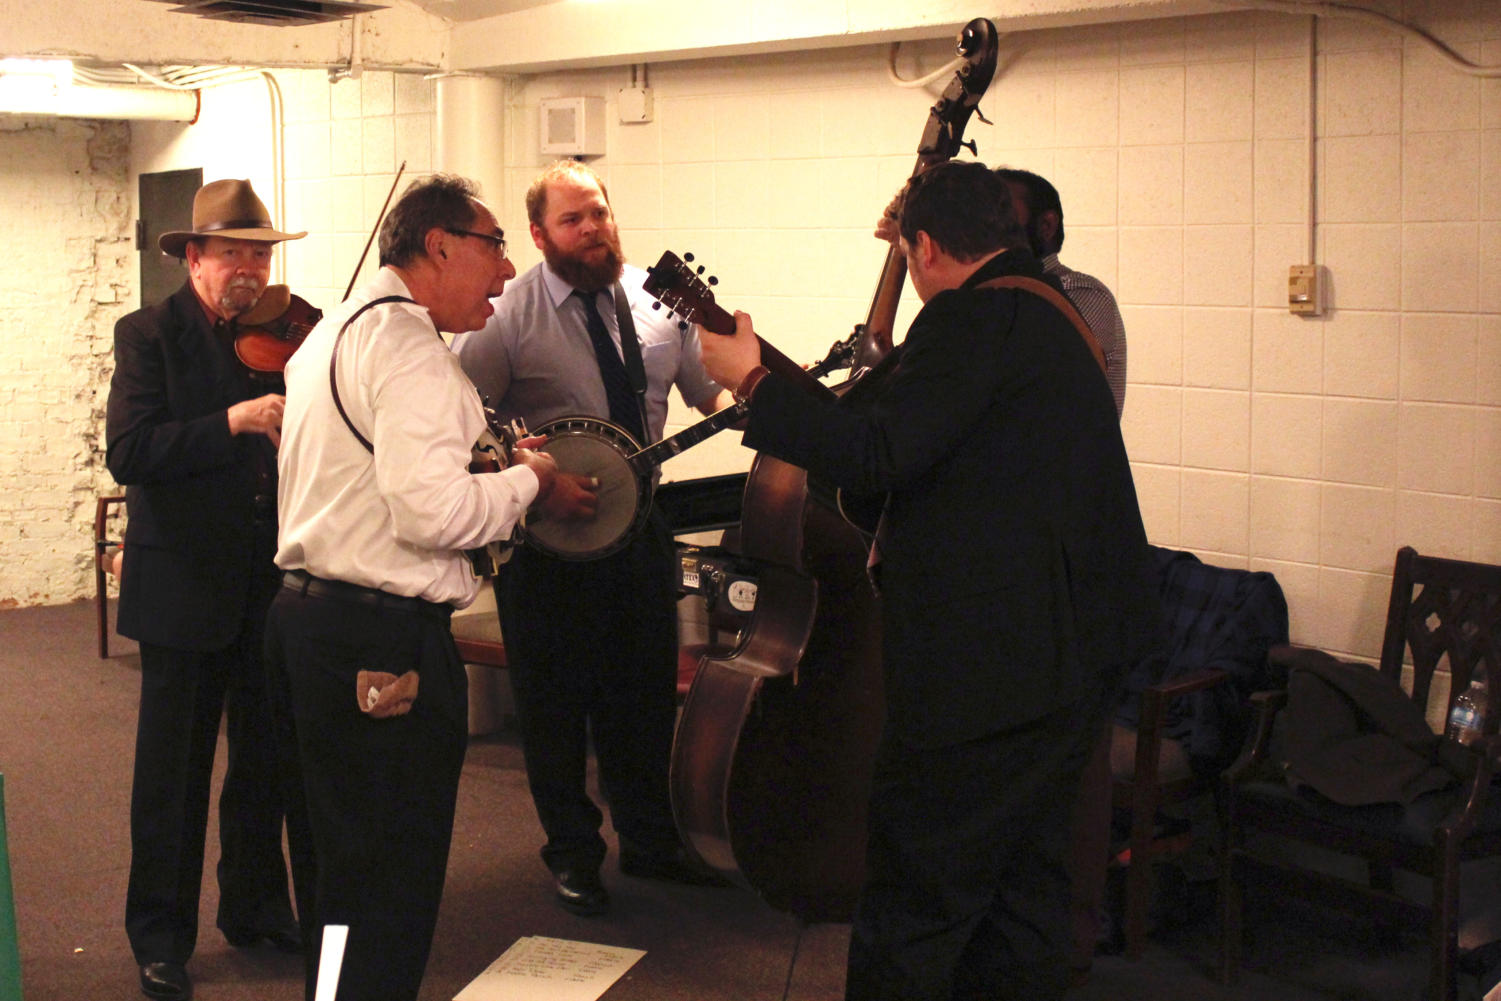 Bobby Hicks and his band practice their bluegrass set in the Mandel Hall Green Room.